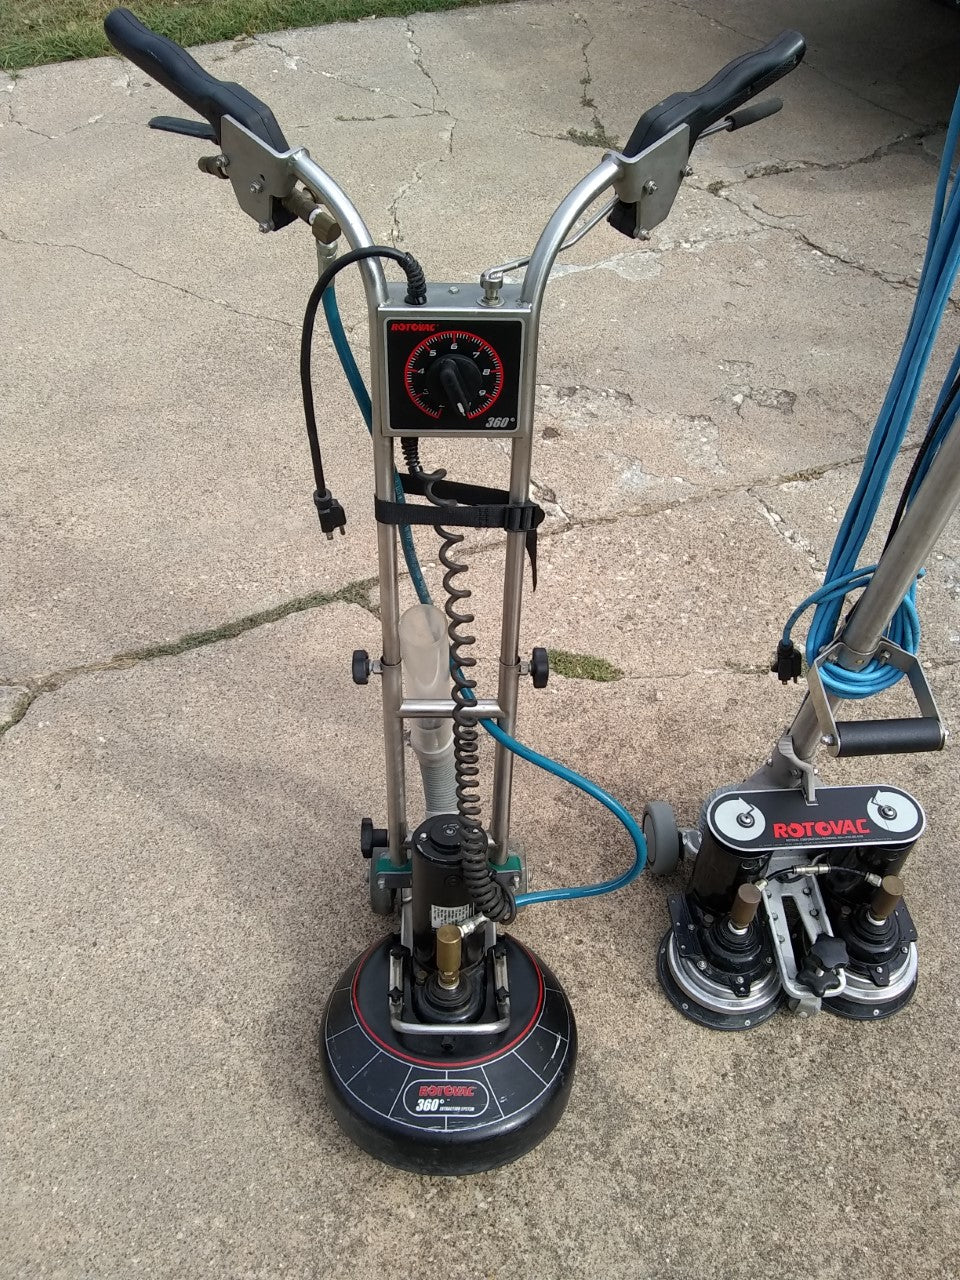 Coming soon Rotovac 360 Mint and Rotovac Power Wand both Mint condition PR Owned ZIP76053